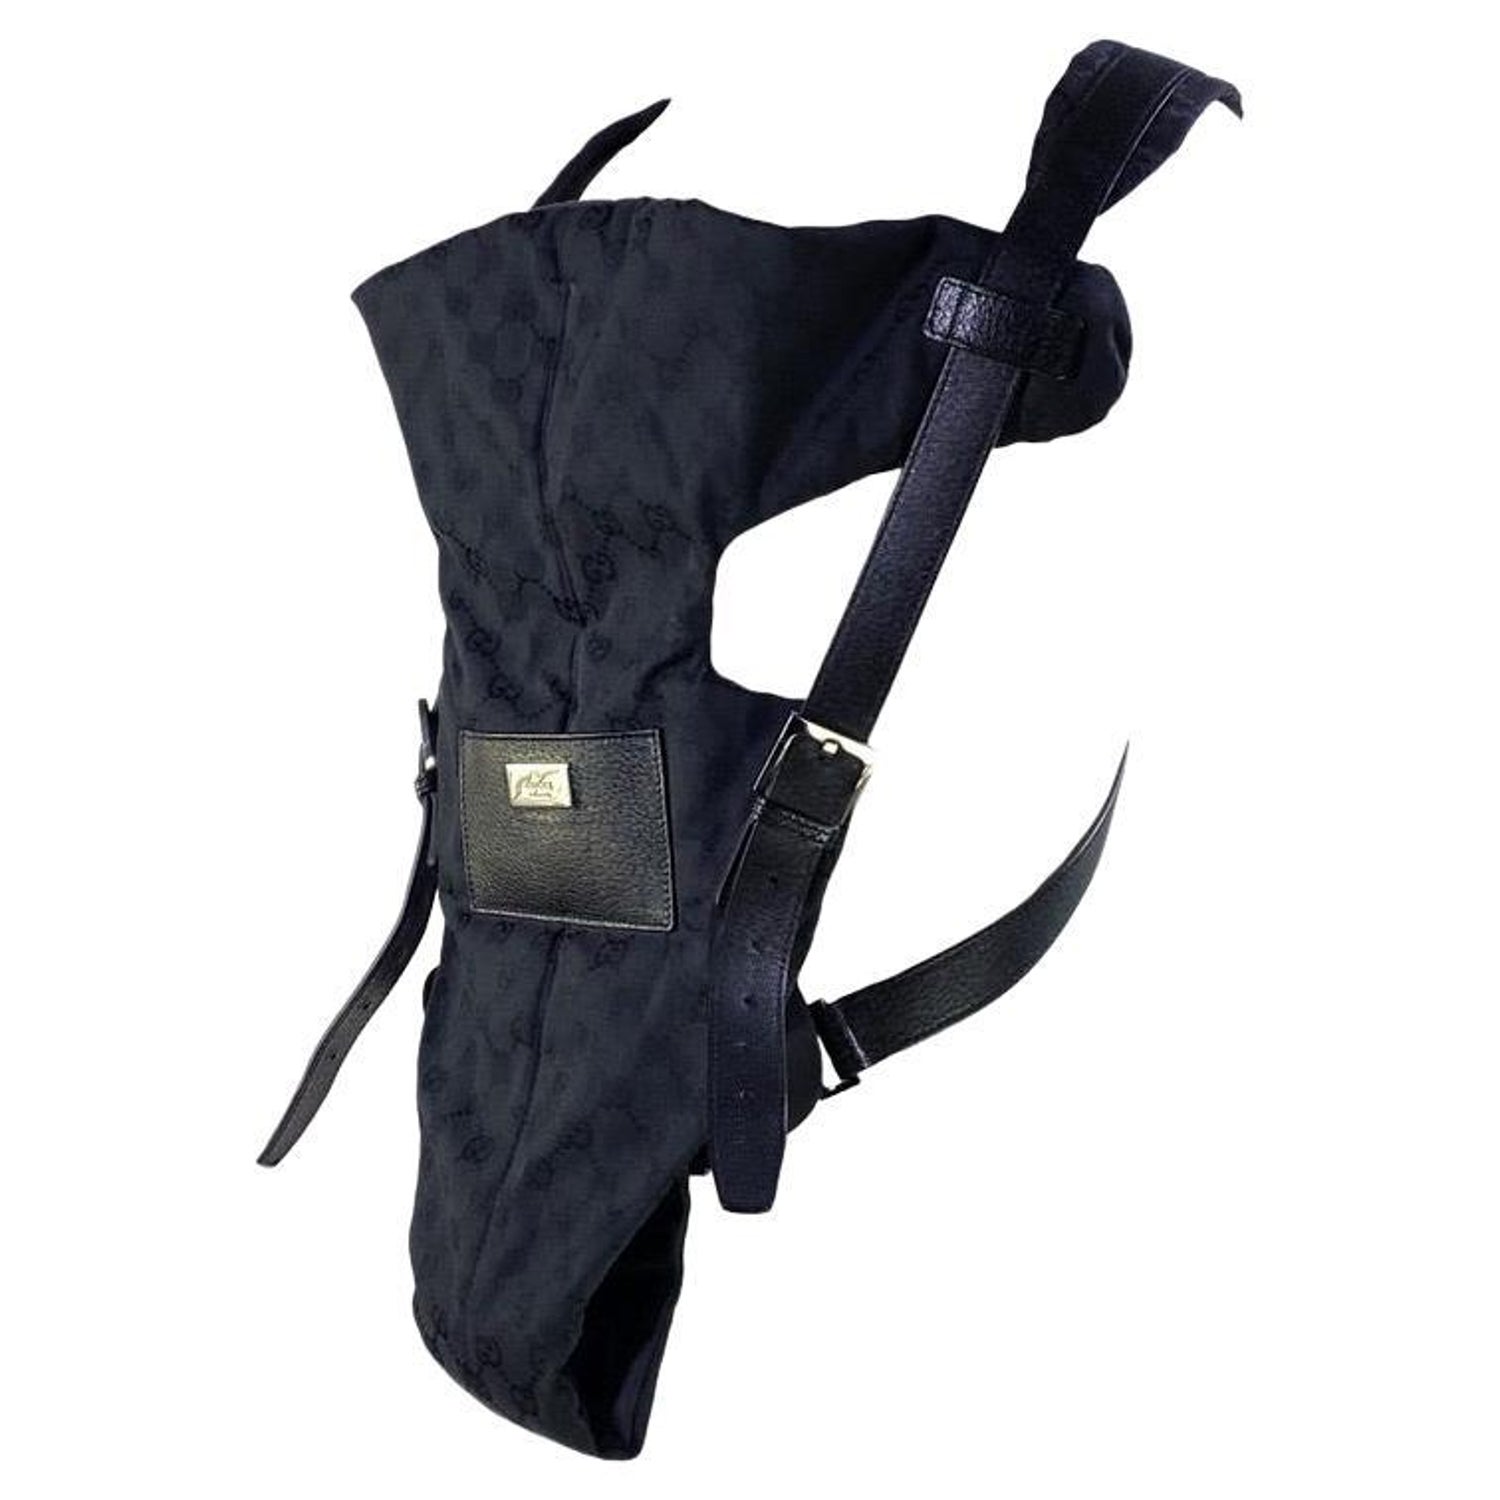 Gucci Baby Carrier - For Sale on 1stDibs